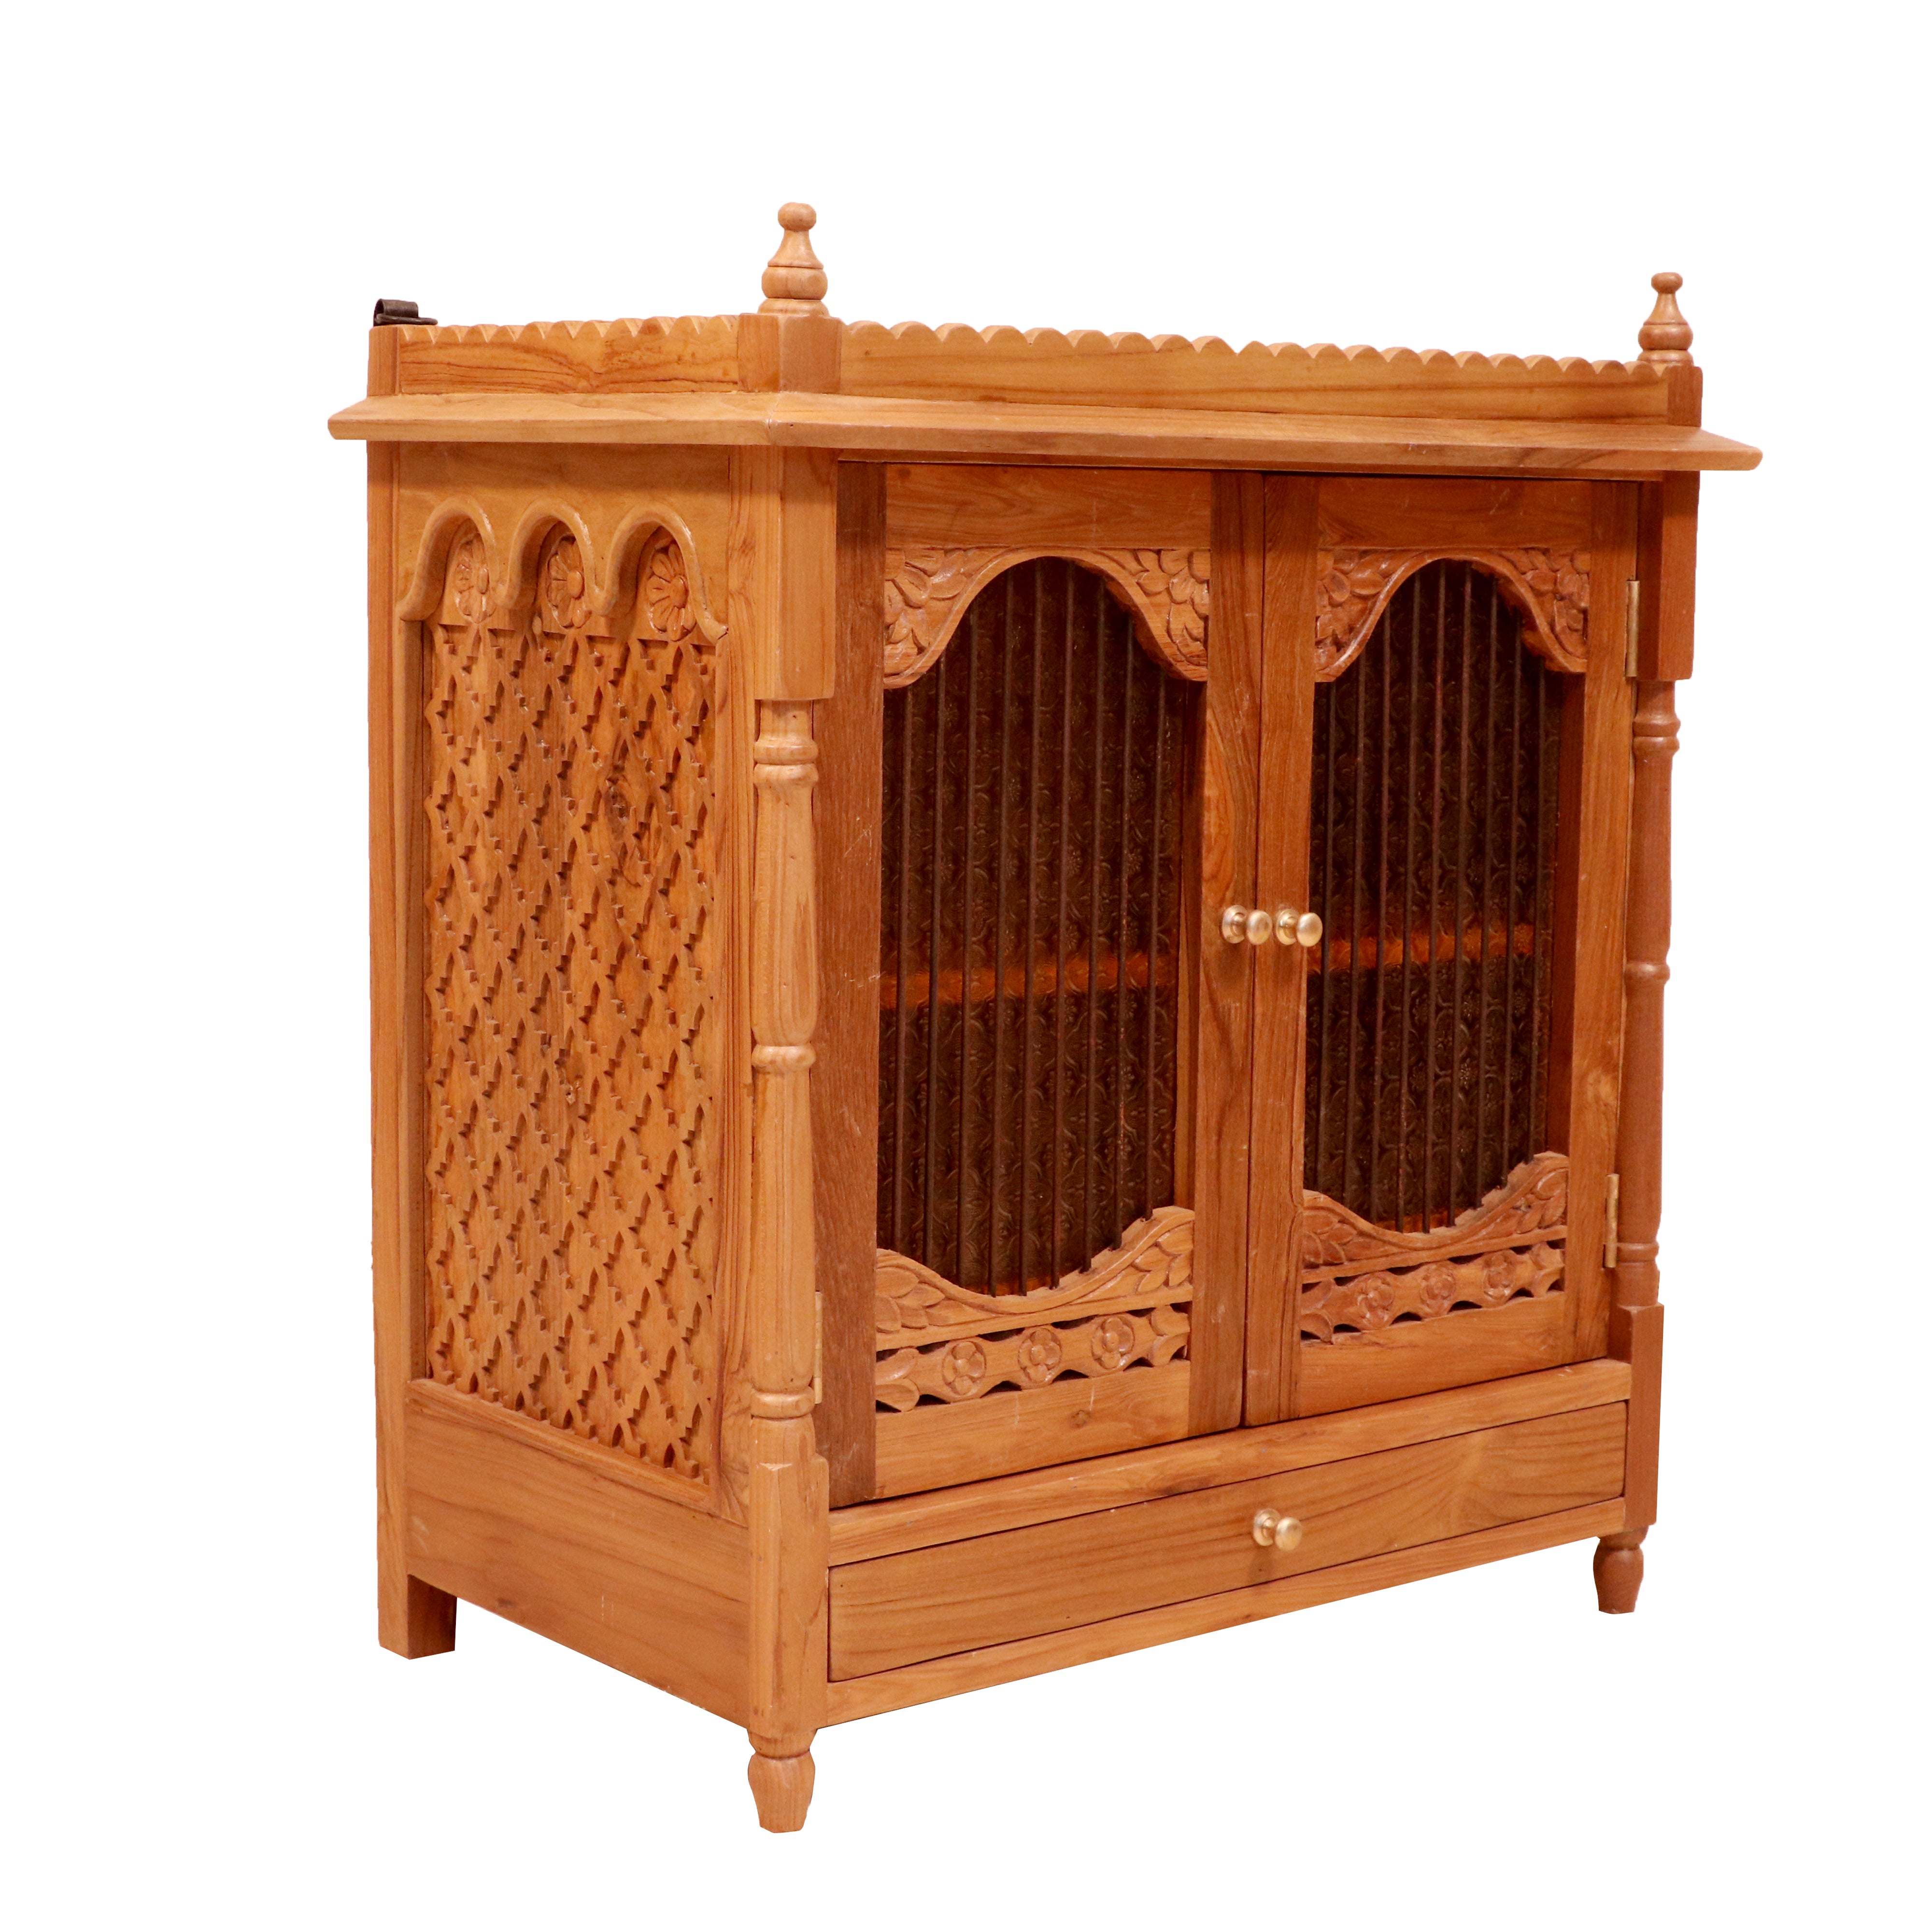 Classic Chronic Carved Handmade Wooden Temple with Single Drawer Temple